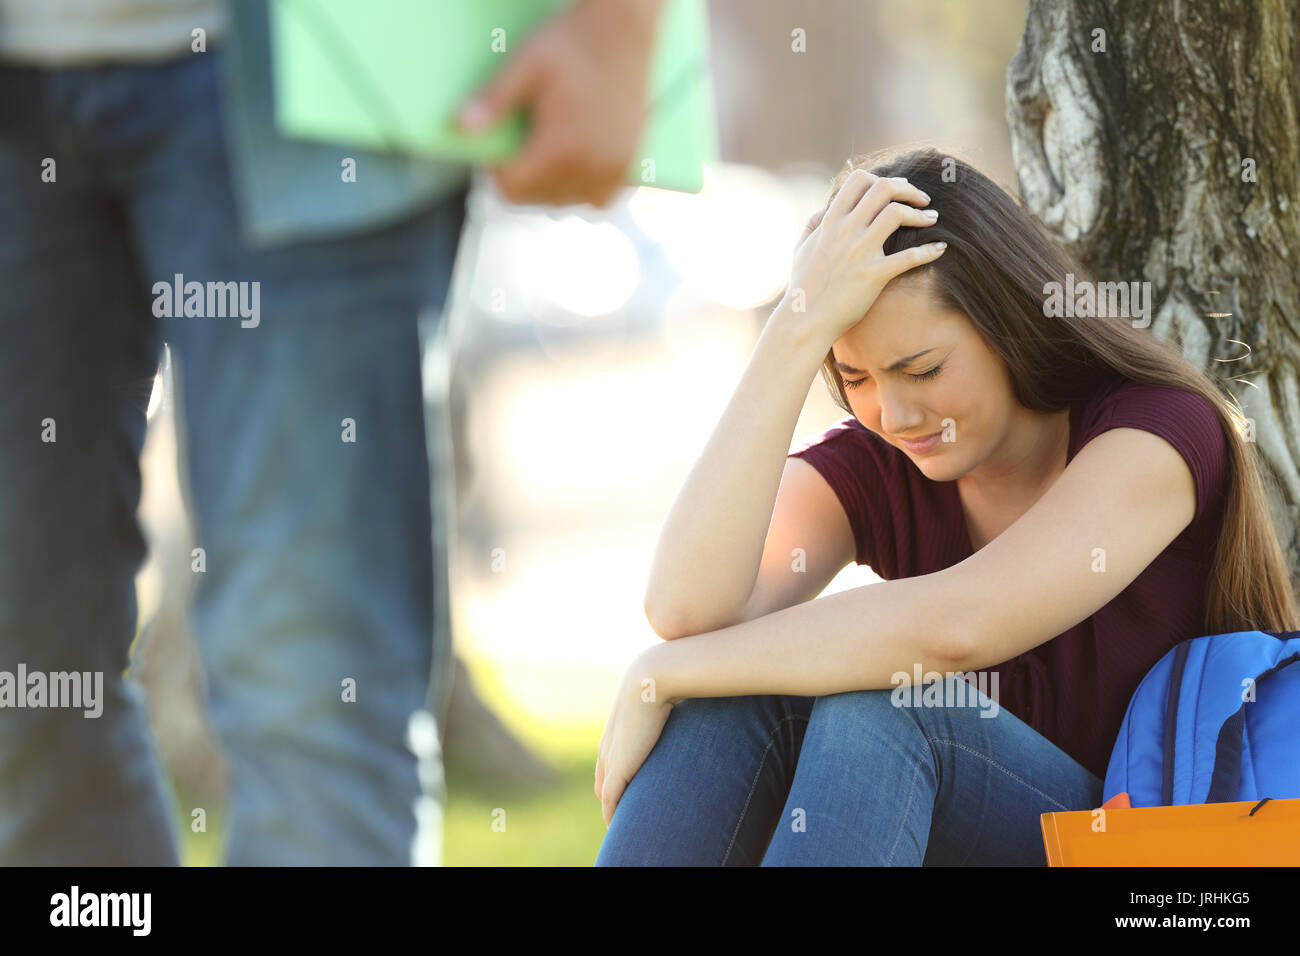 Couple of students breaking up a relationship with the guy leaving his girlfriend Stock Photo